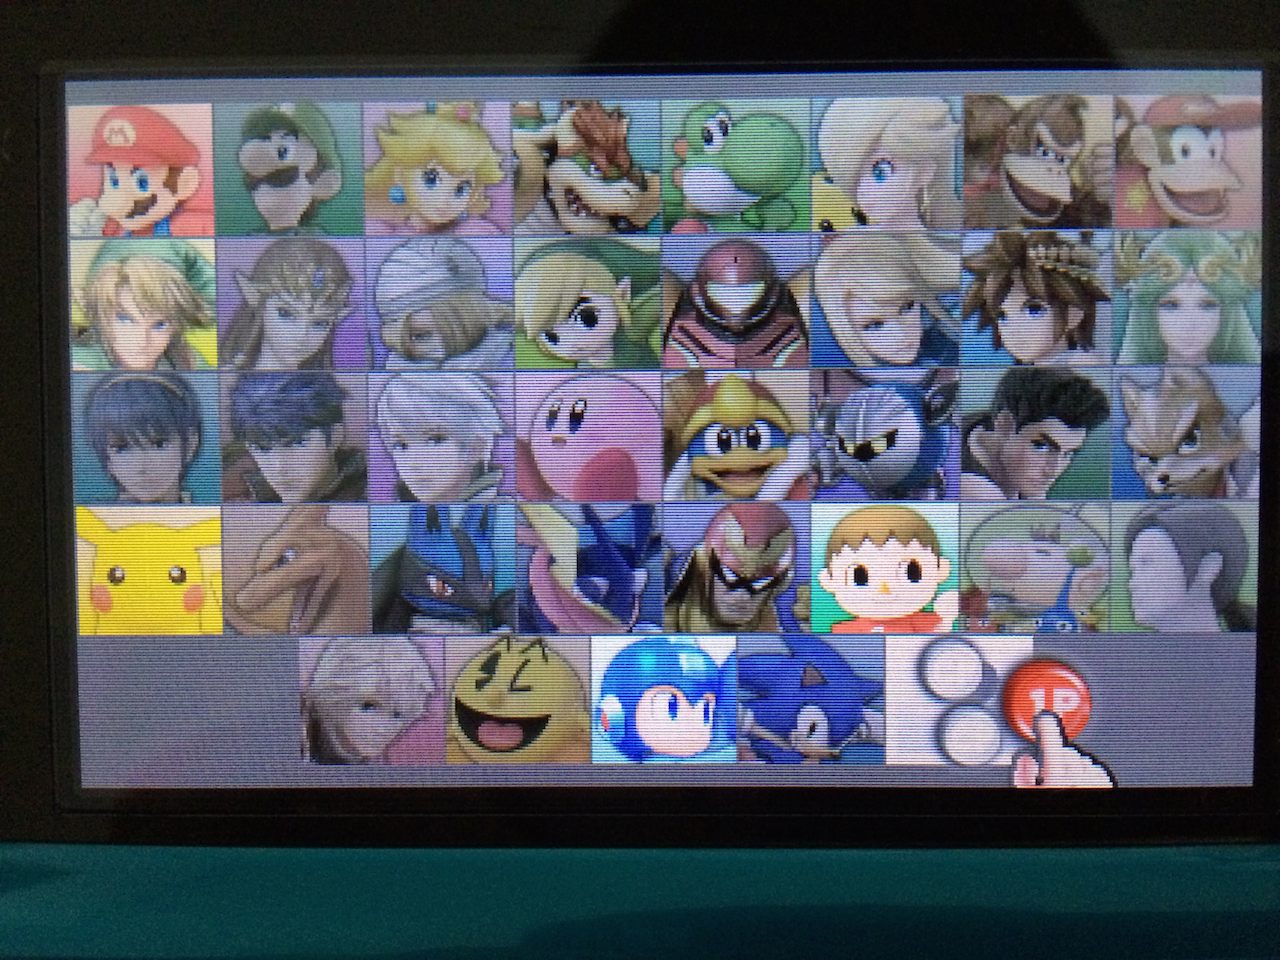 Smash bros for 3ds trial version 03